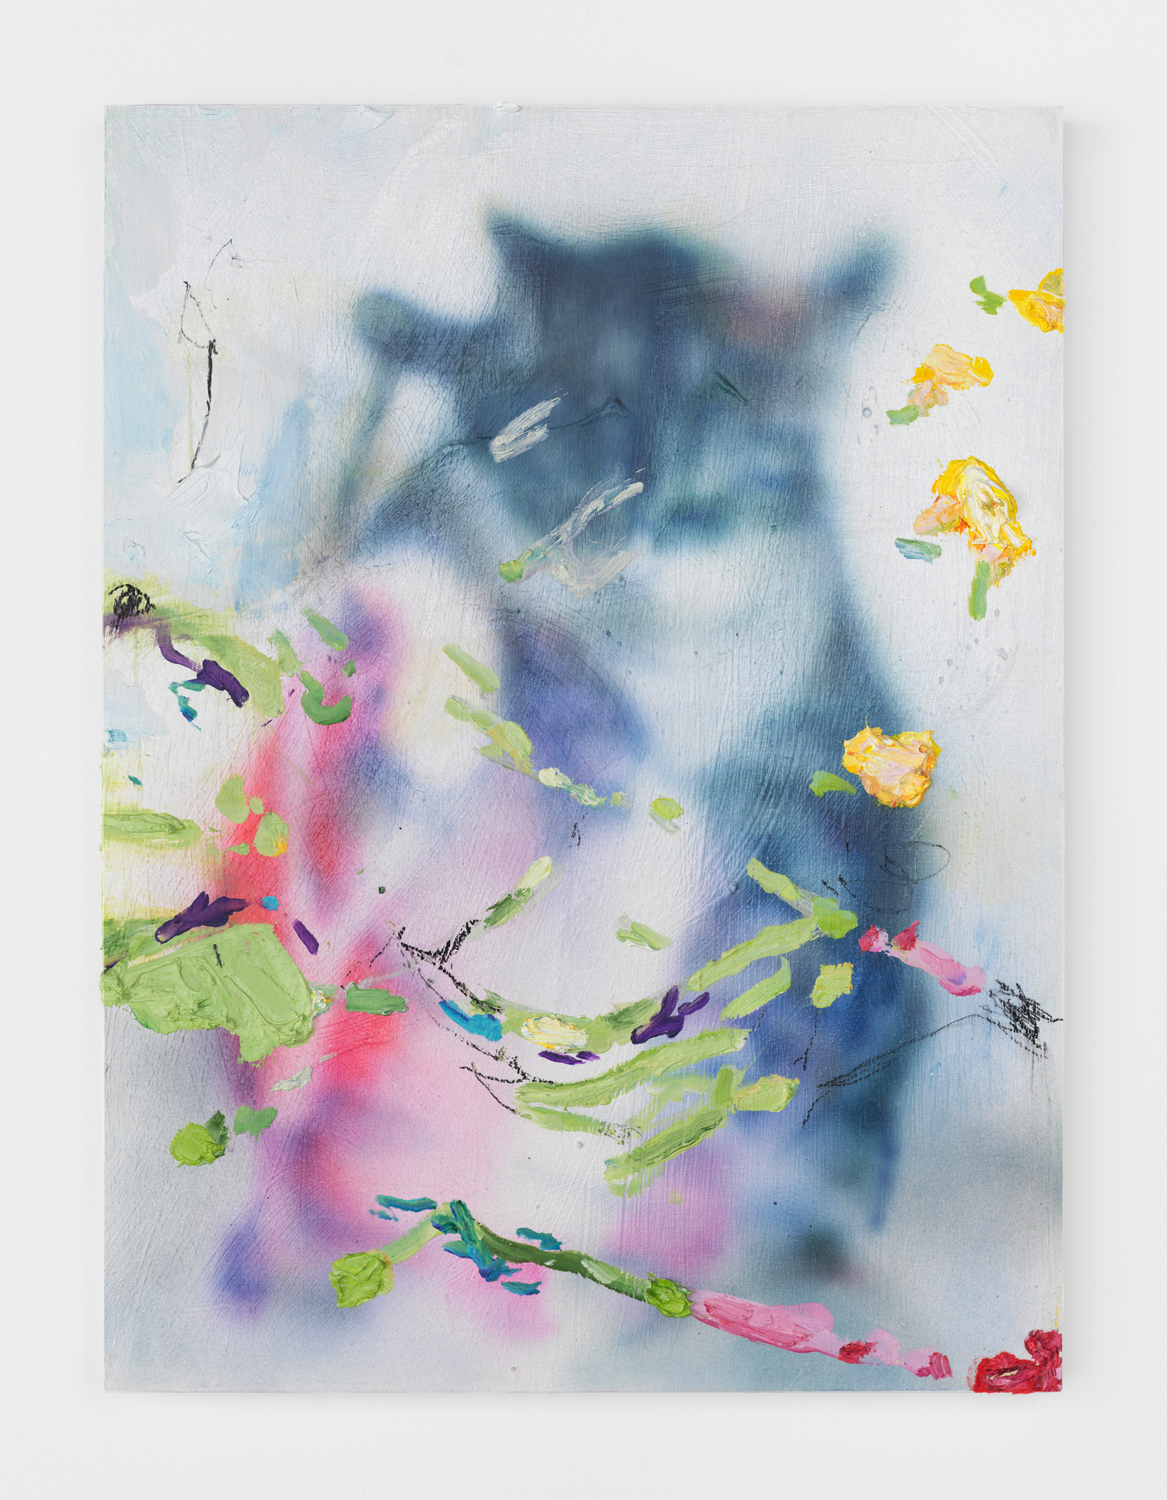 Rachel Rossin, Loop While, 2021, Oil and airbrushed acrylic on panel, 24h x 18w in.